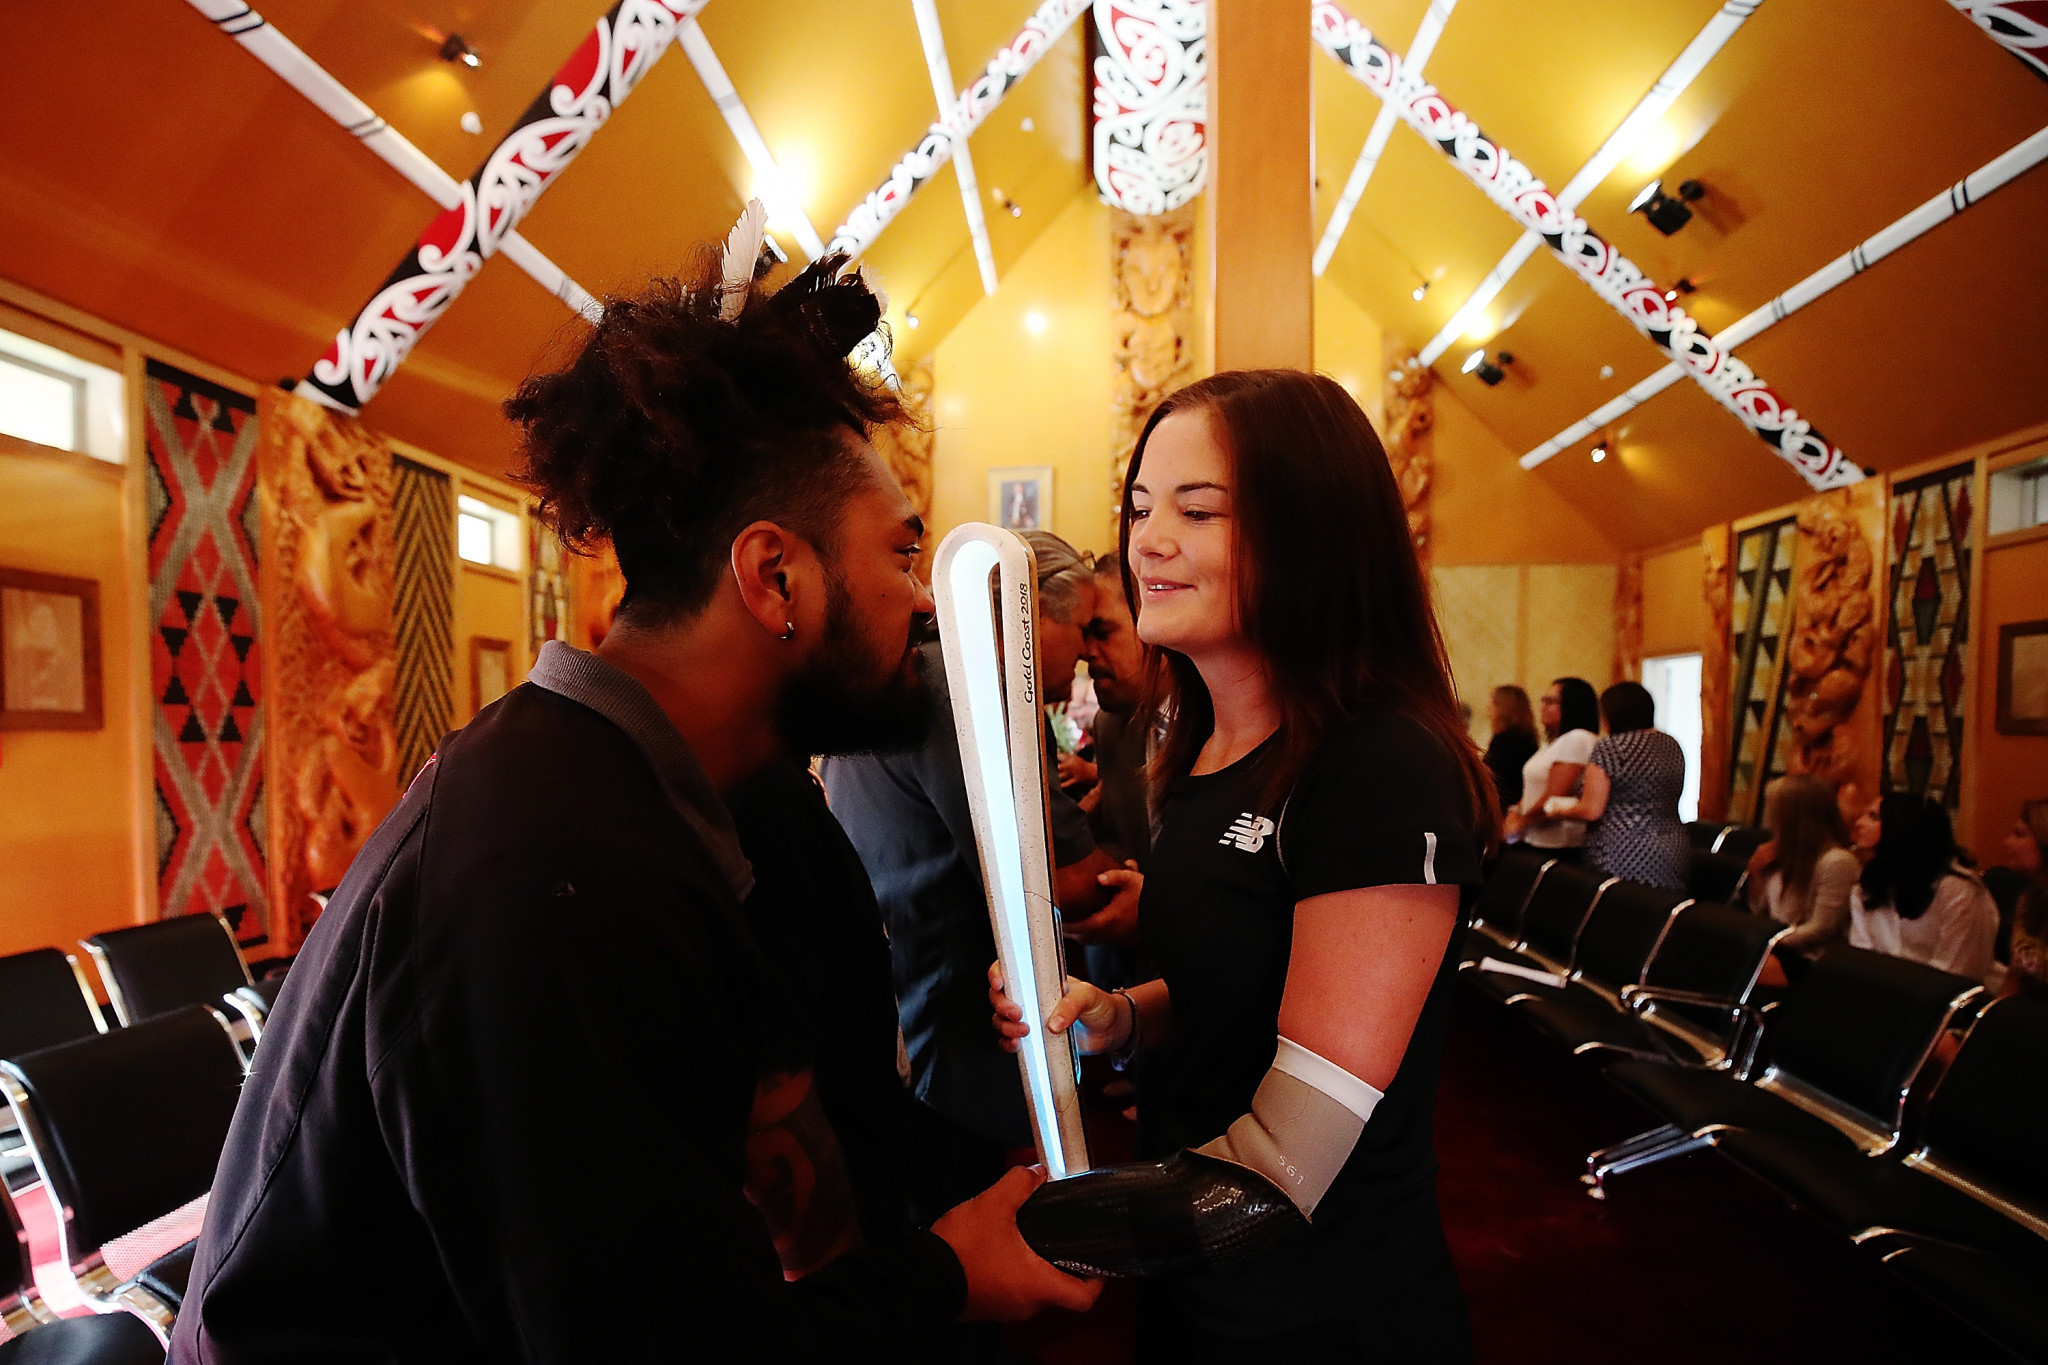 New Zealand Para javelin thrower Holly Robinson greets a Maori warrior during the Commonwealth Games Queen's Baton Relay function at Te Manukanuka o Hoturoa Marae  in Auckland, New Zealand ©Getty Images